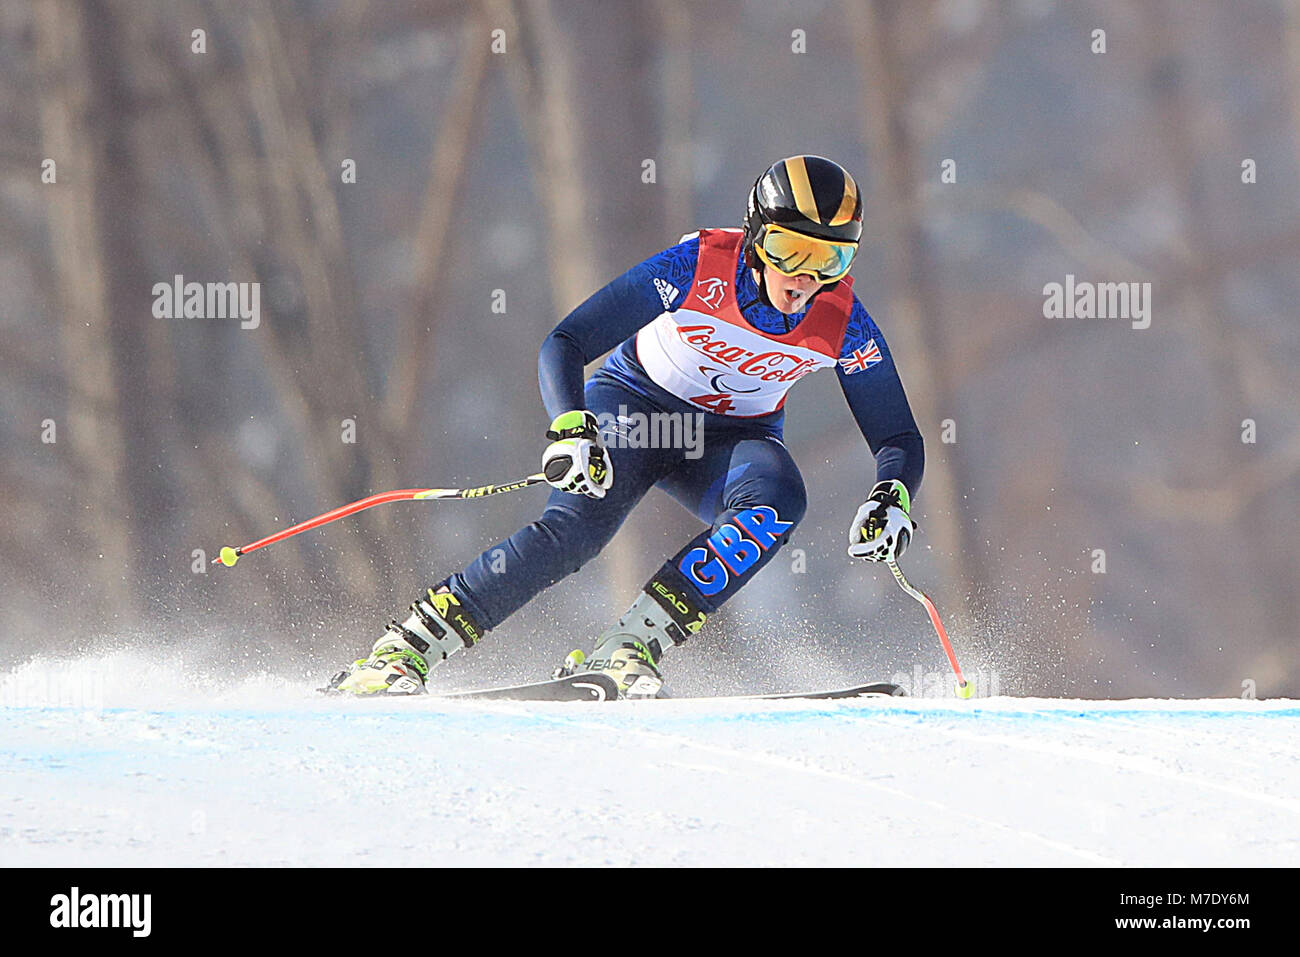 Great Britain's Millie Knight on her way to Silver in the Women's Downhill, Visually Impaired at the Jeongseon Alpine Centre during day one of the PyeongChang 2018 Winter Paralympics in South Korea. Stock Photo